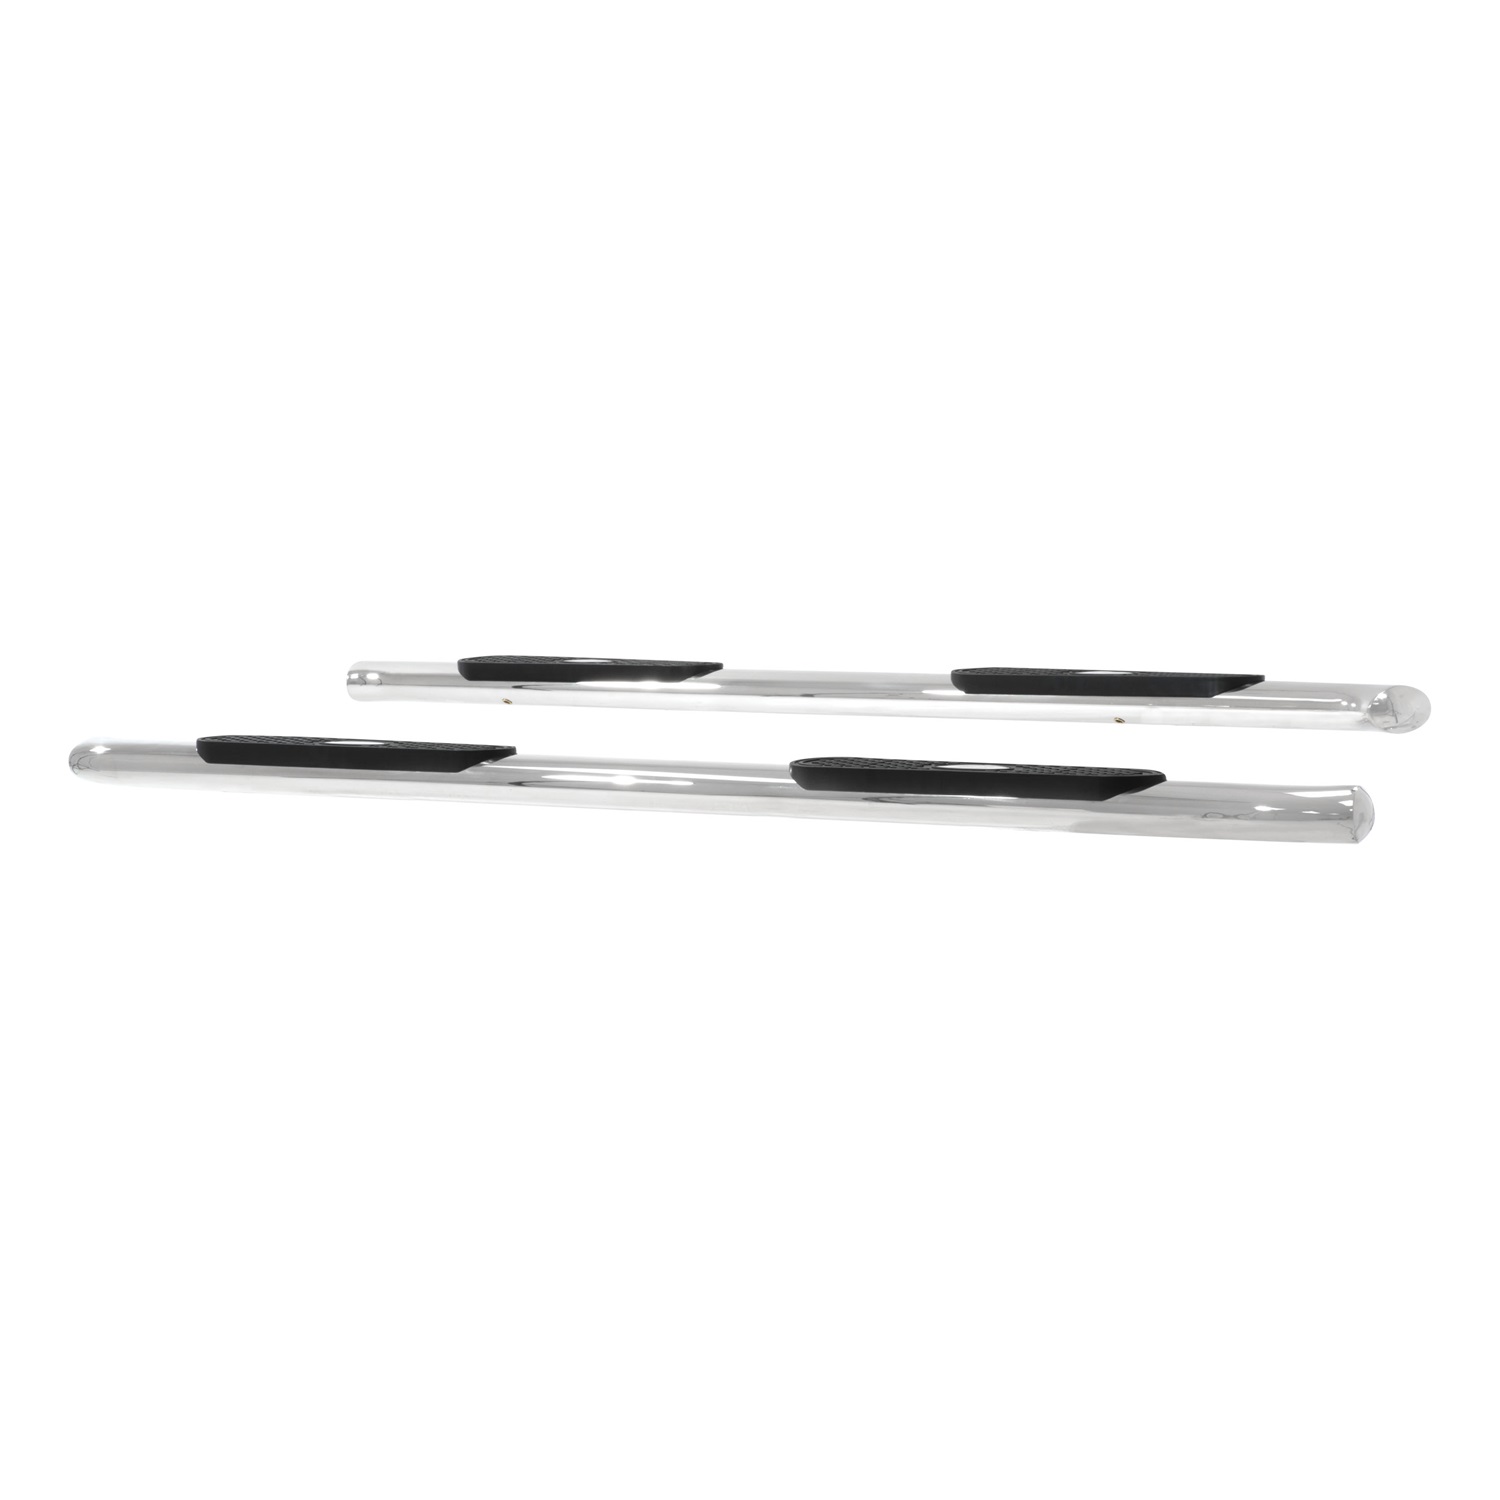 Aries Automotive S223039 The Standard Black 4-Inch Oval Nerf Bar